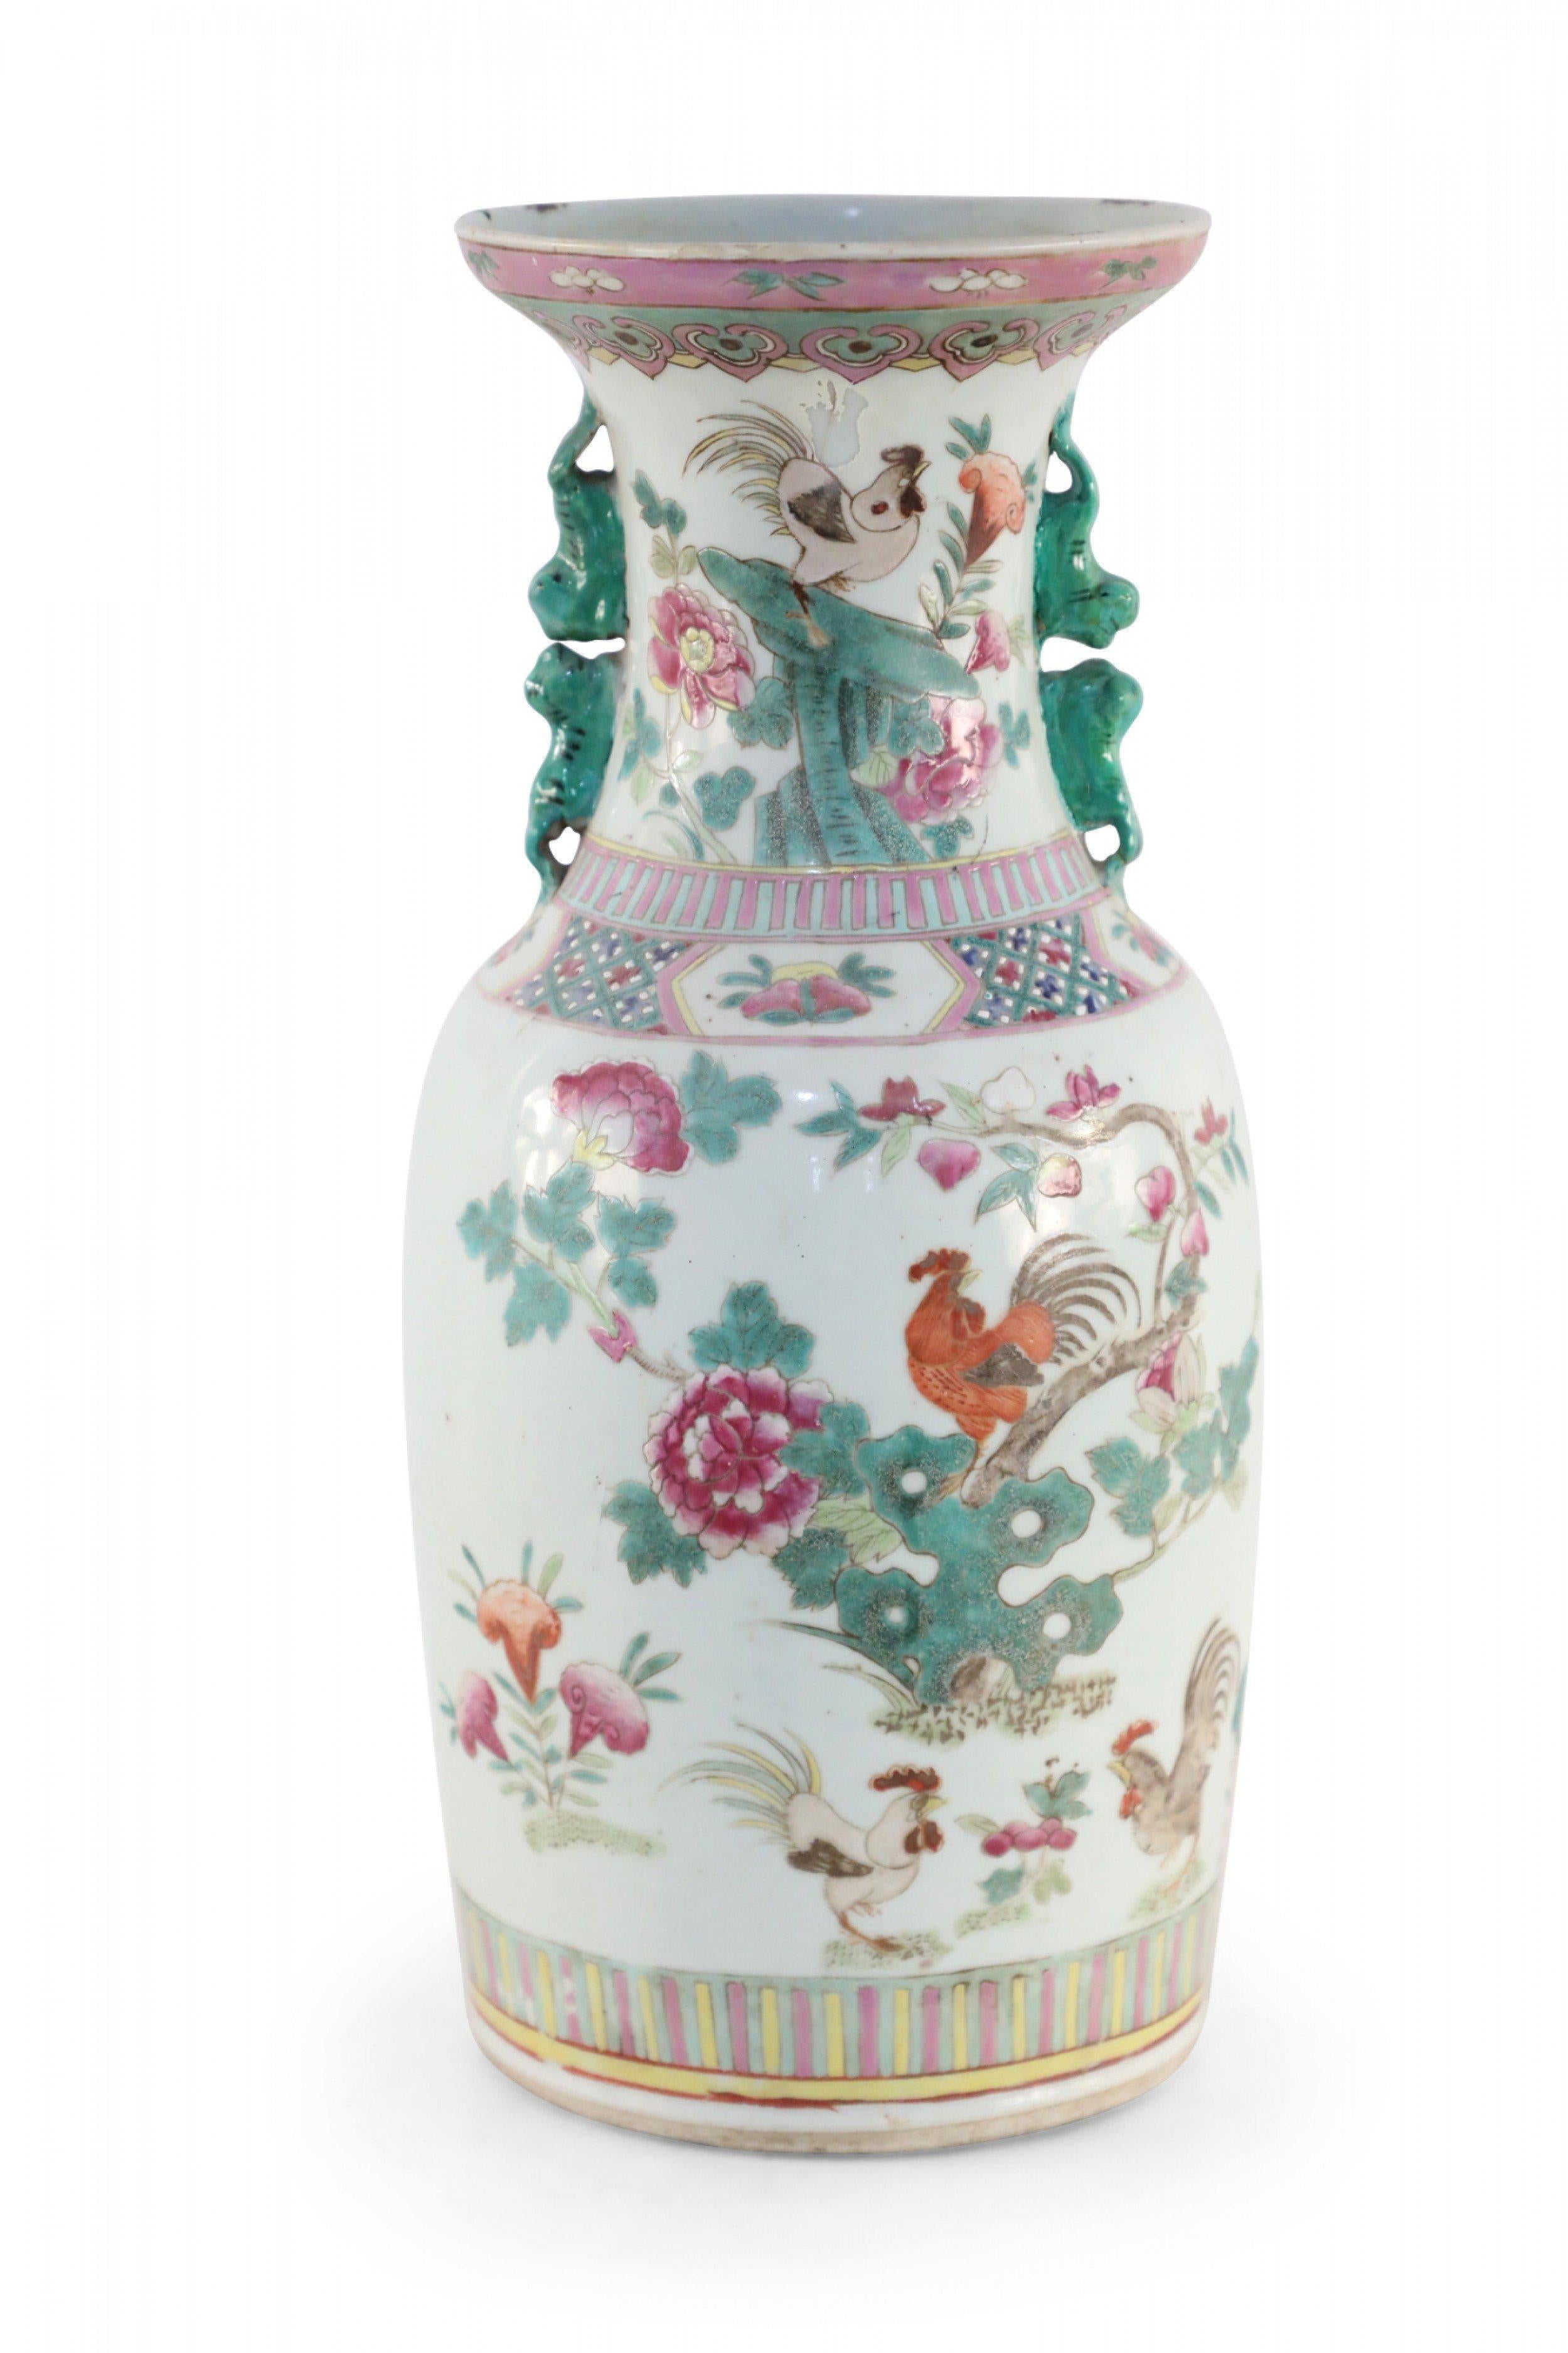 Chinese White, Green, and Pink Floral and Rooster Design Porcelain Urn For Sale 1